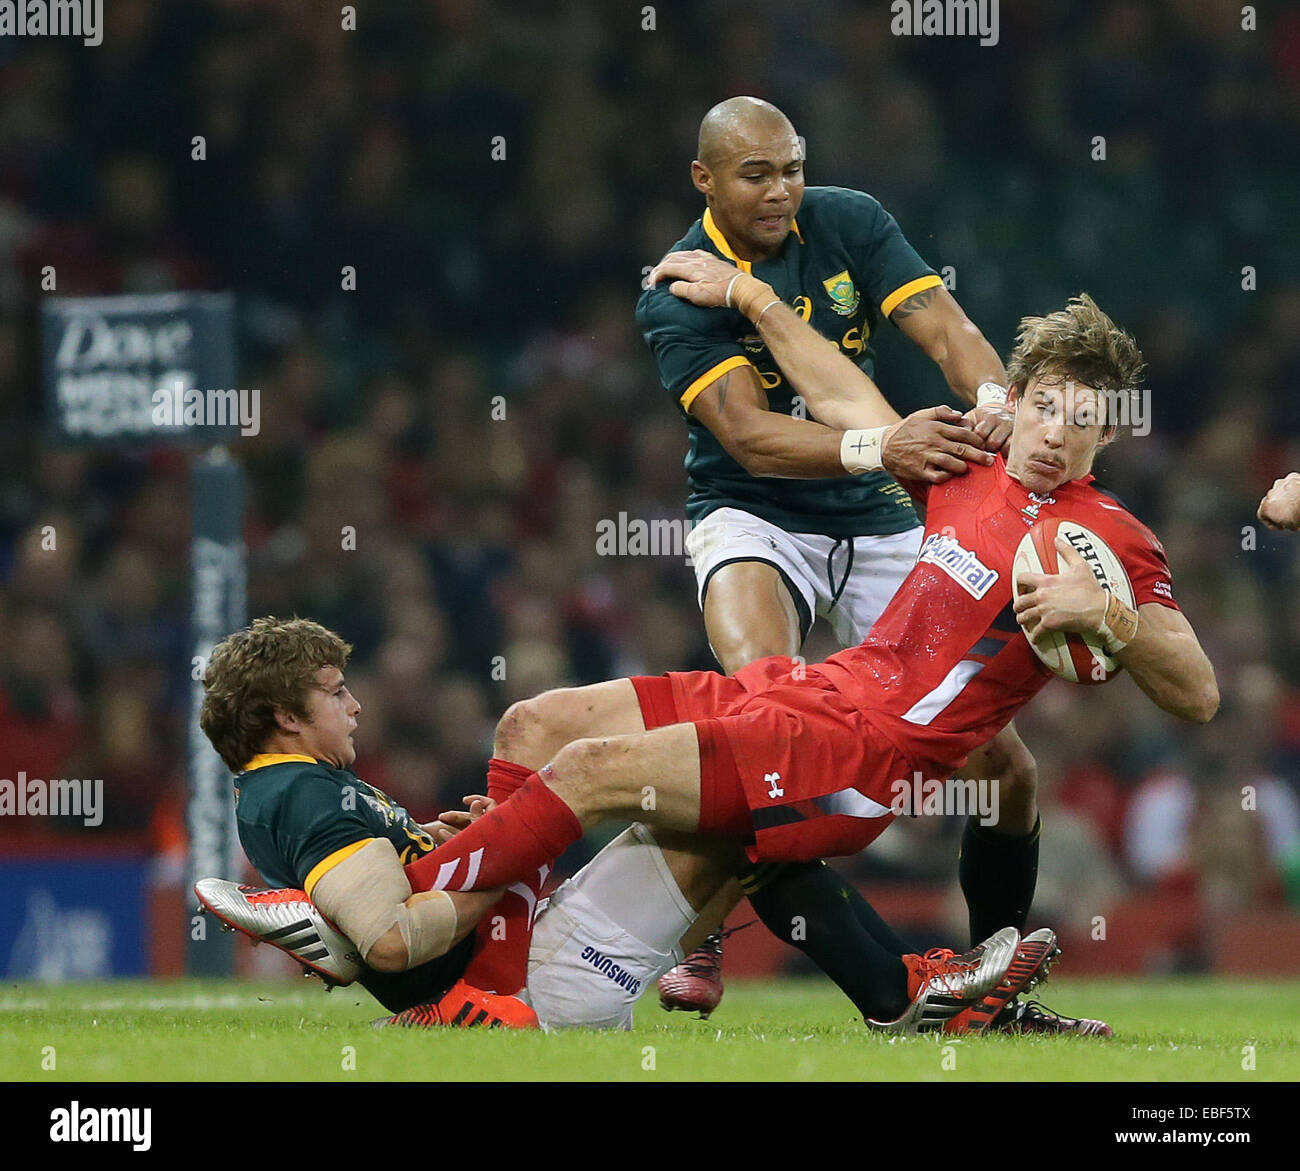 Cardiff, UK. 29th Nov, 2014. Liam Williams of Wales tackled by Pat Lambie of South Africa - Autumn Internationals - Wales vs South Africa - Millennium Stadium - Cardiff - Wales - 29th November 2014 - Picture Simon Bellis/Sportimage. Credit:  csm/Alamy Live News Stock Photo